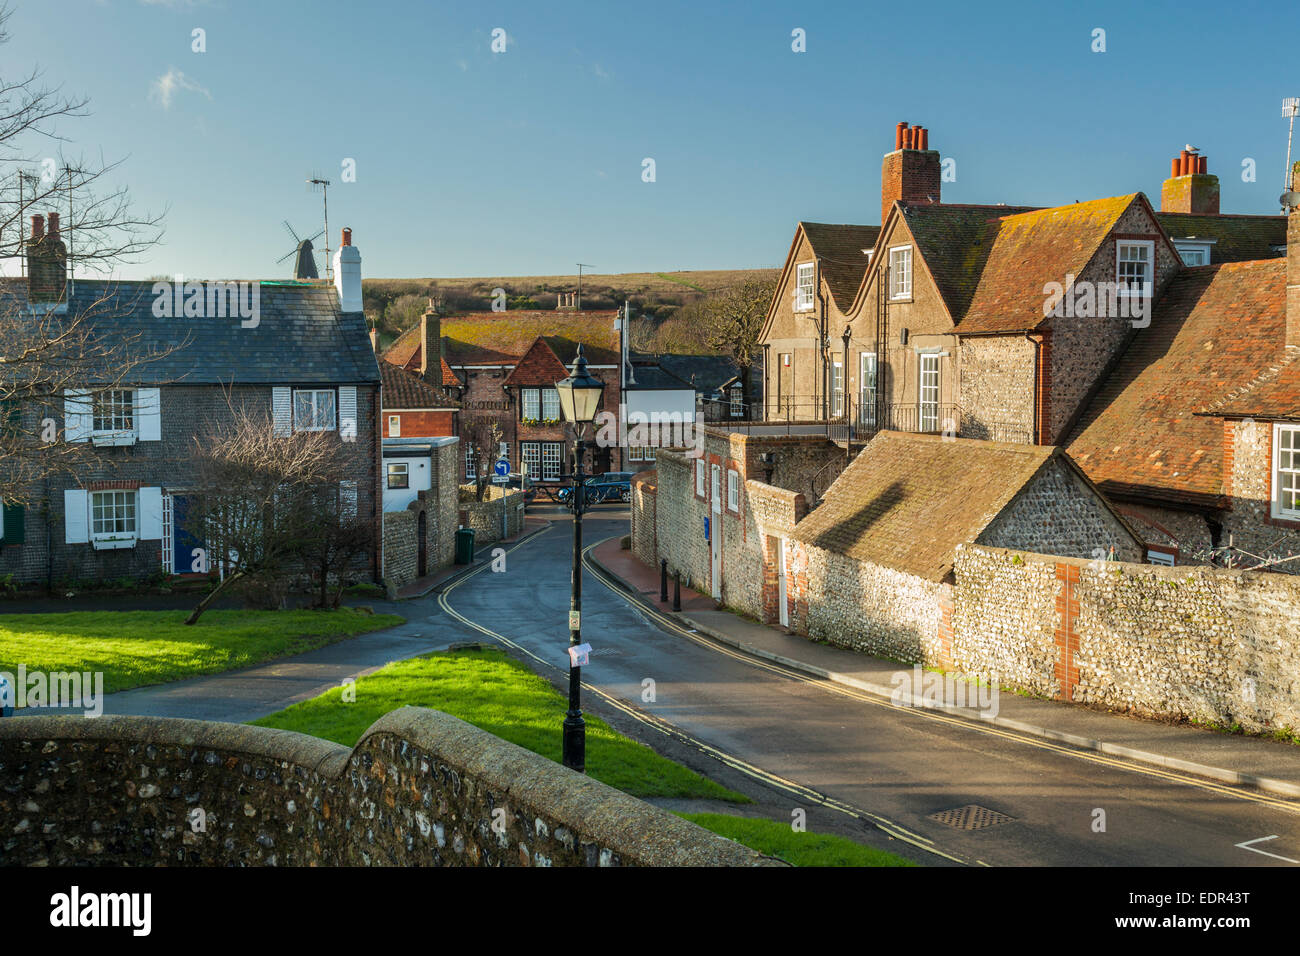 Nachmittag in Rottingdean Dorf, East Sussex, England. Stockfoto